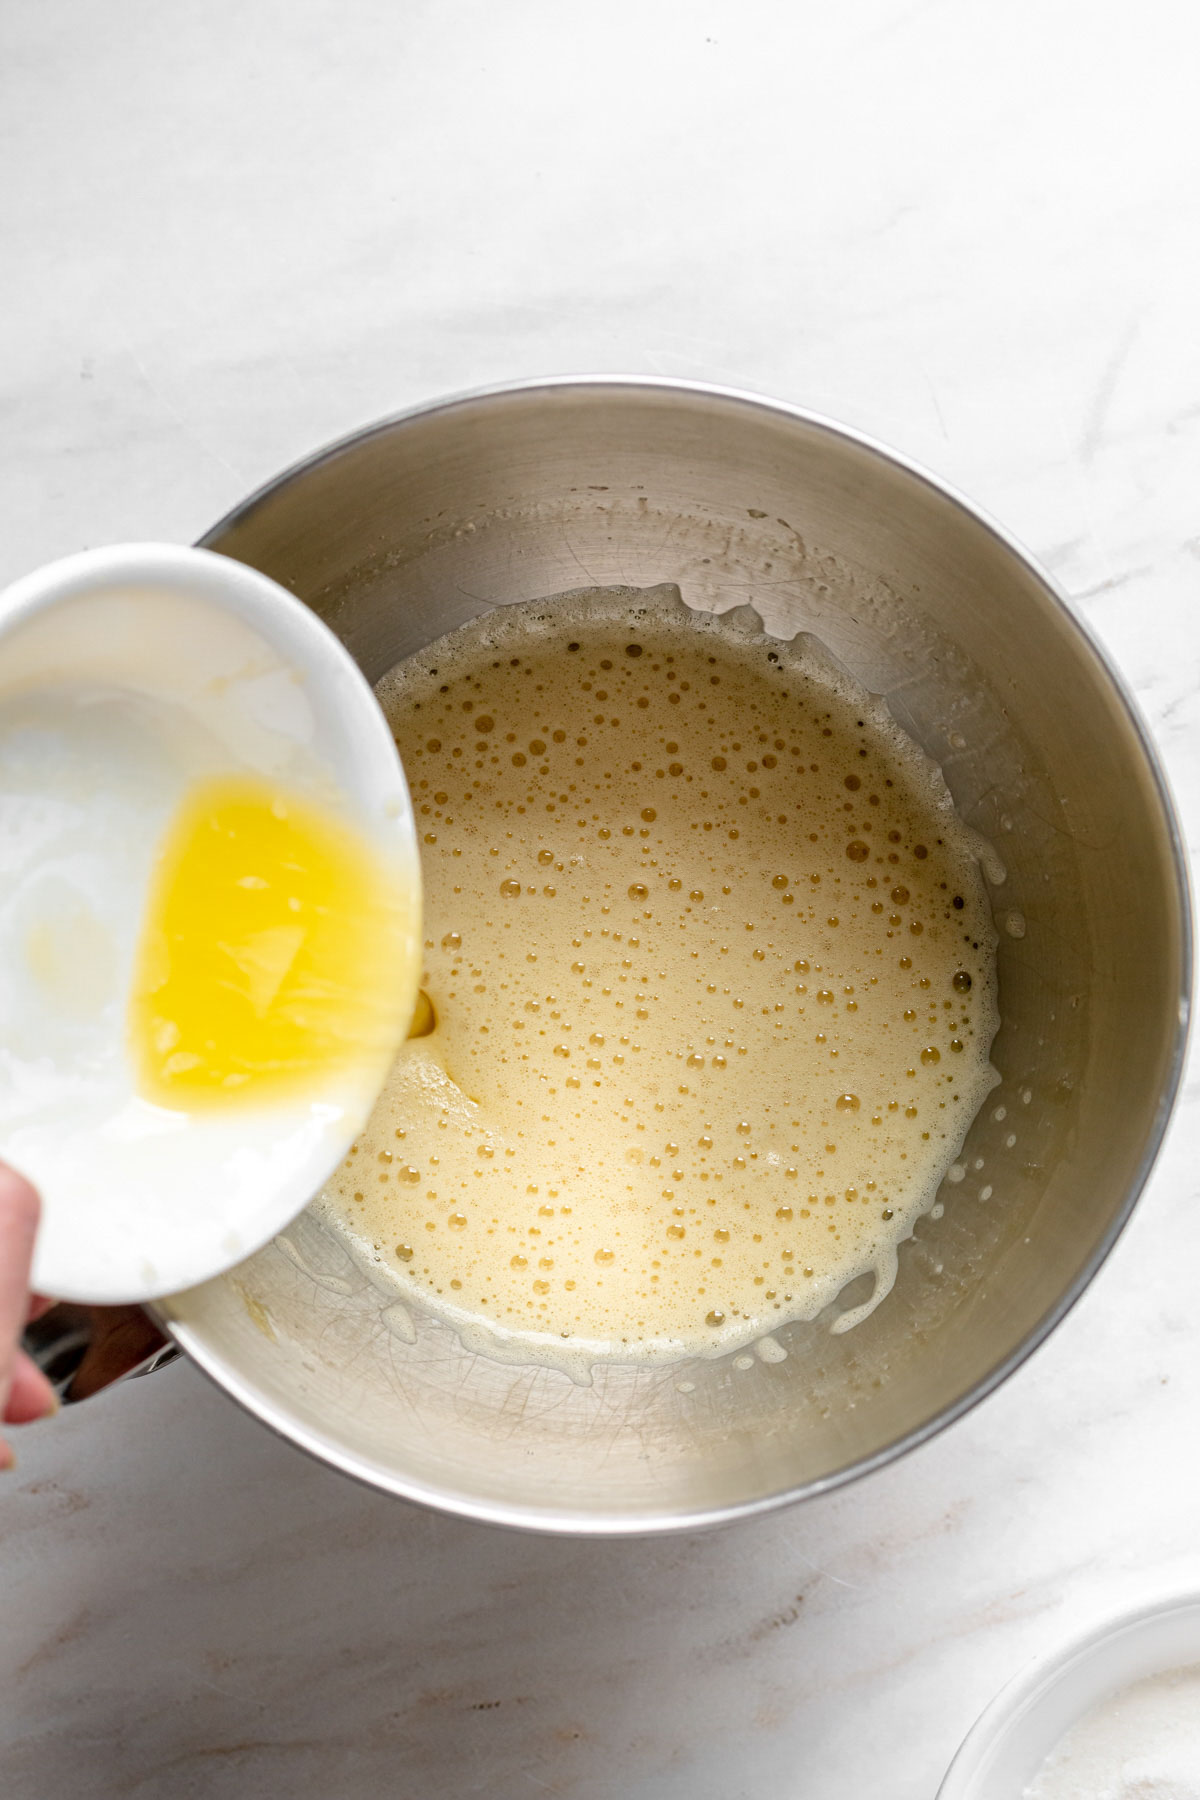 Butter added into eggs.